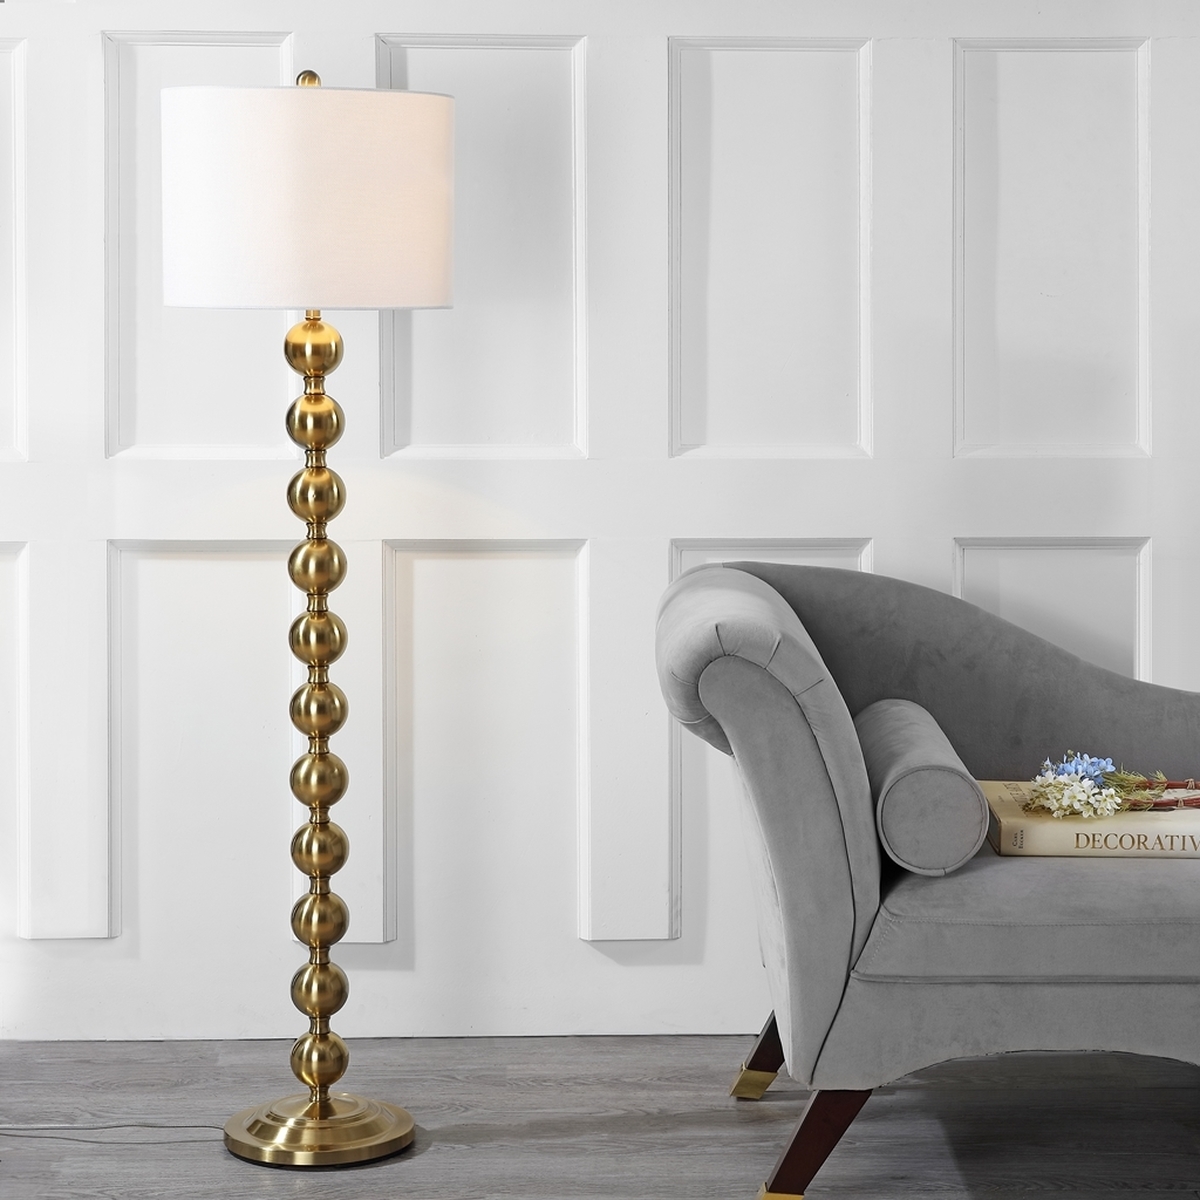 Reflections 58.5-Inch H Stacked Ball Floor Lamp - Brass - Safavieh - Image 3